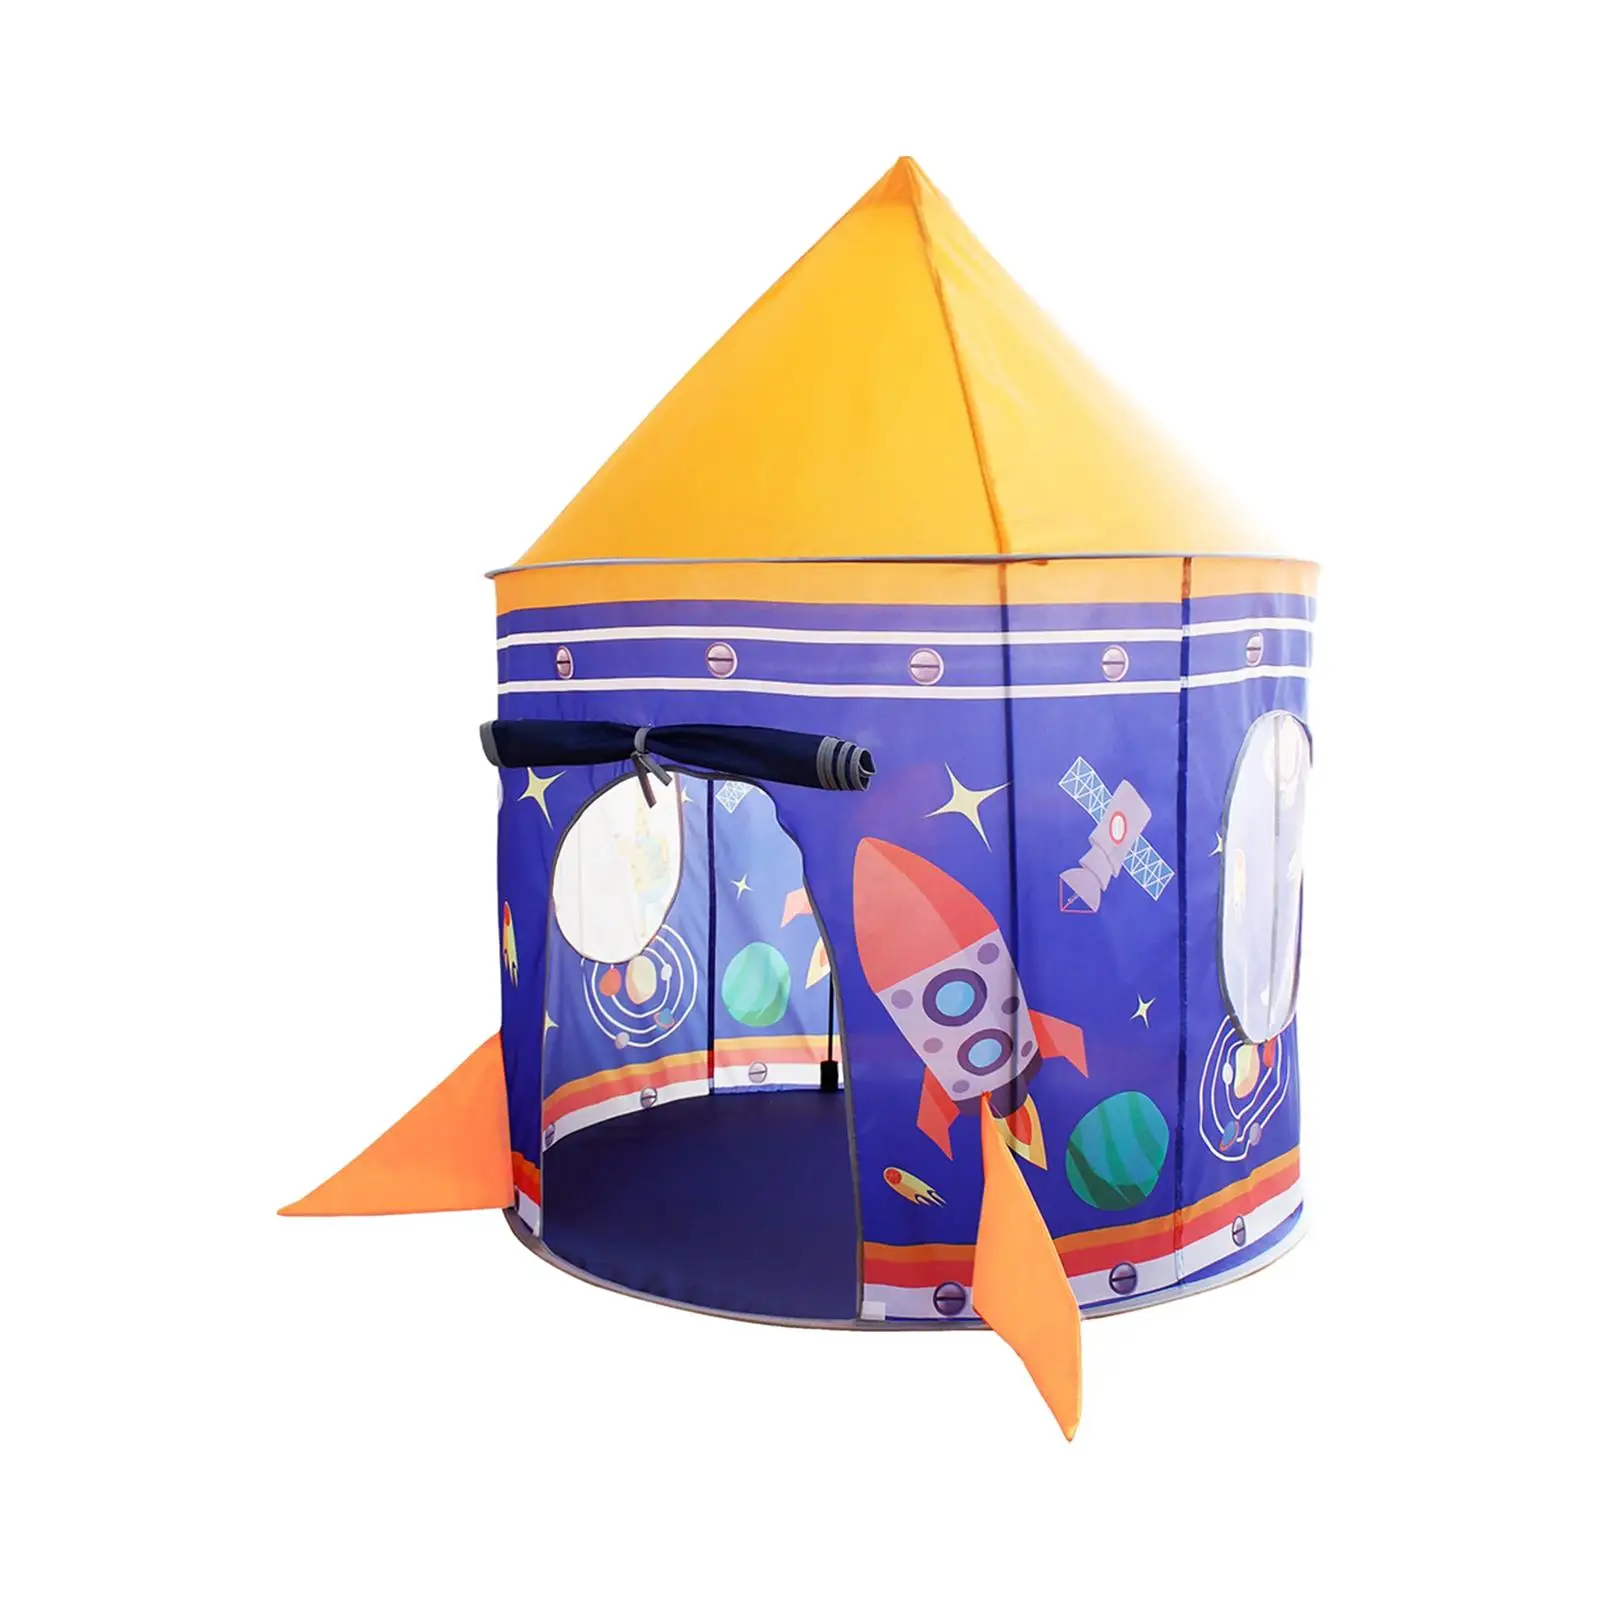 Portable Castle Child Room Decor Playhouse Tent Toys Indoor and Outdoor Play Tent for Toddlers Girls Boys Children Kids Aged 3+